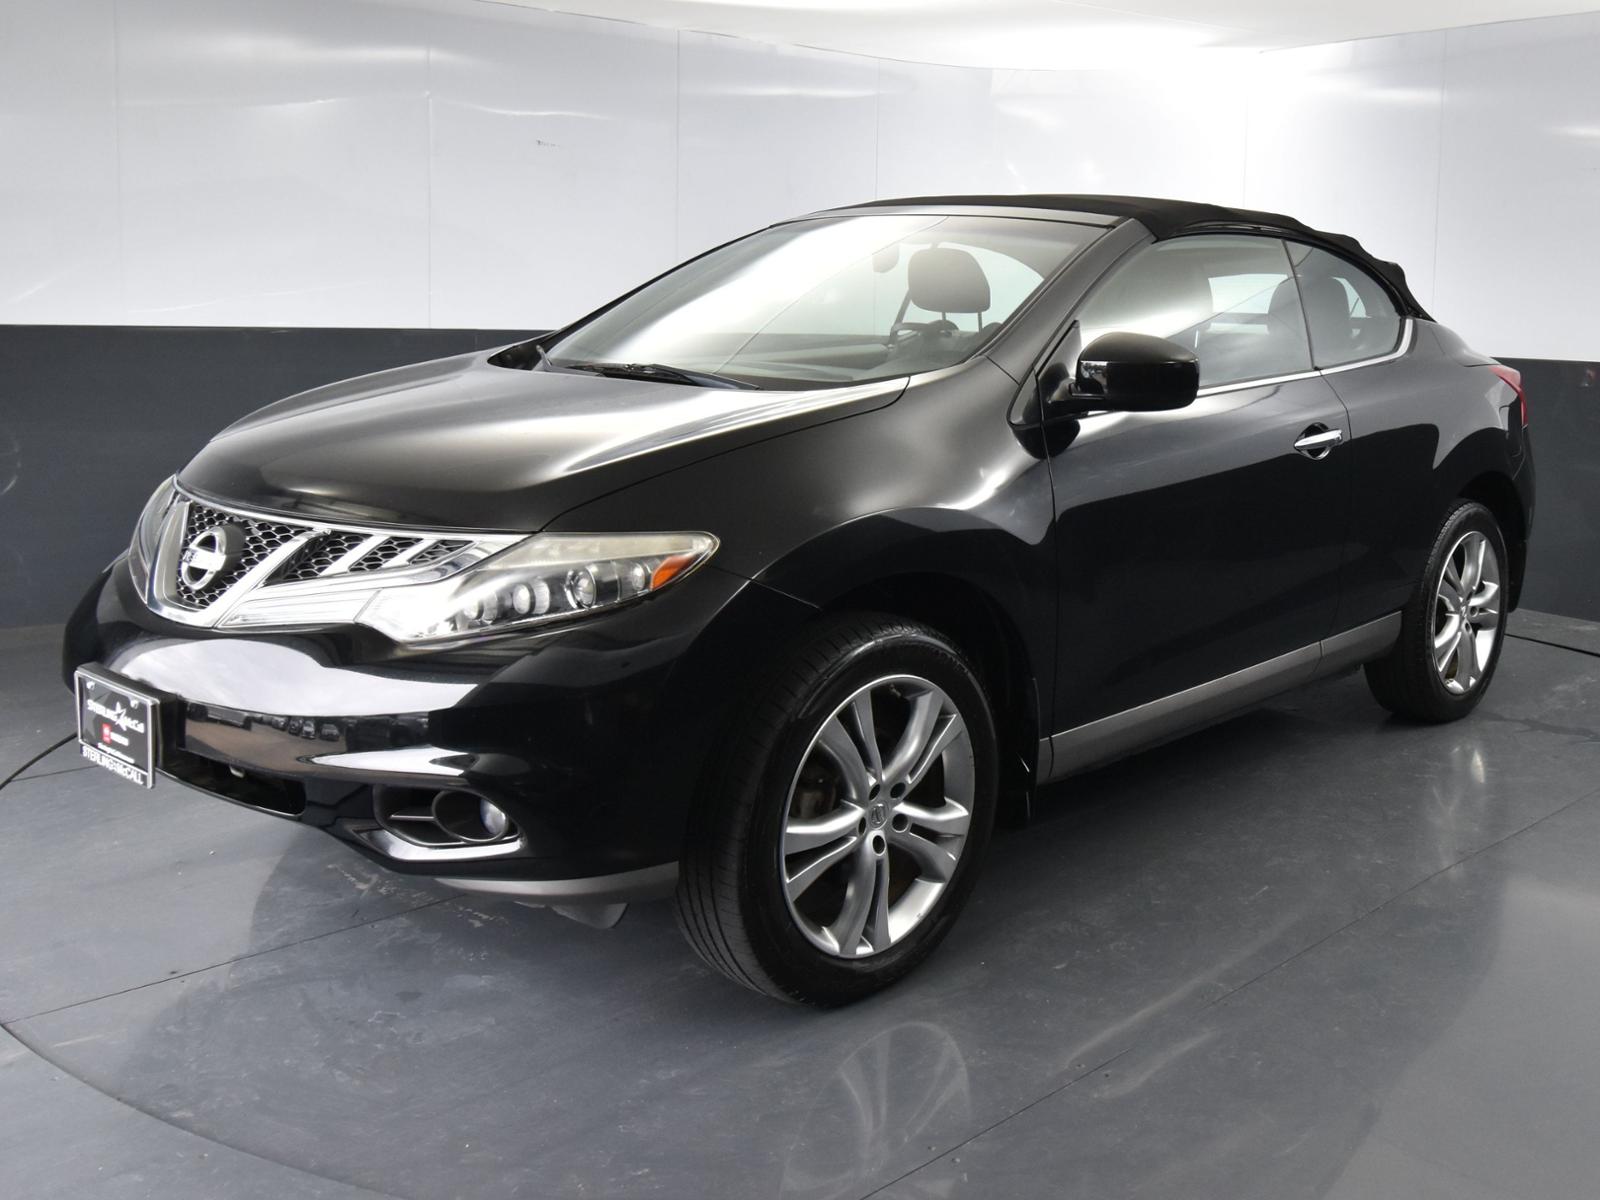 Pre-Owned 2011 Nissan Murano CrossCabriolet AWD 2dr Convertible Sport  Utility in Houston #BW001468 | Sterling McCall Toyota